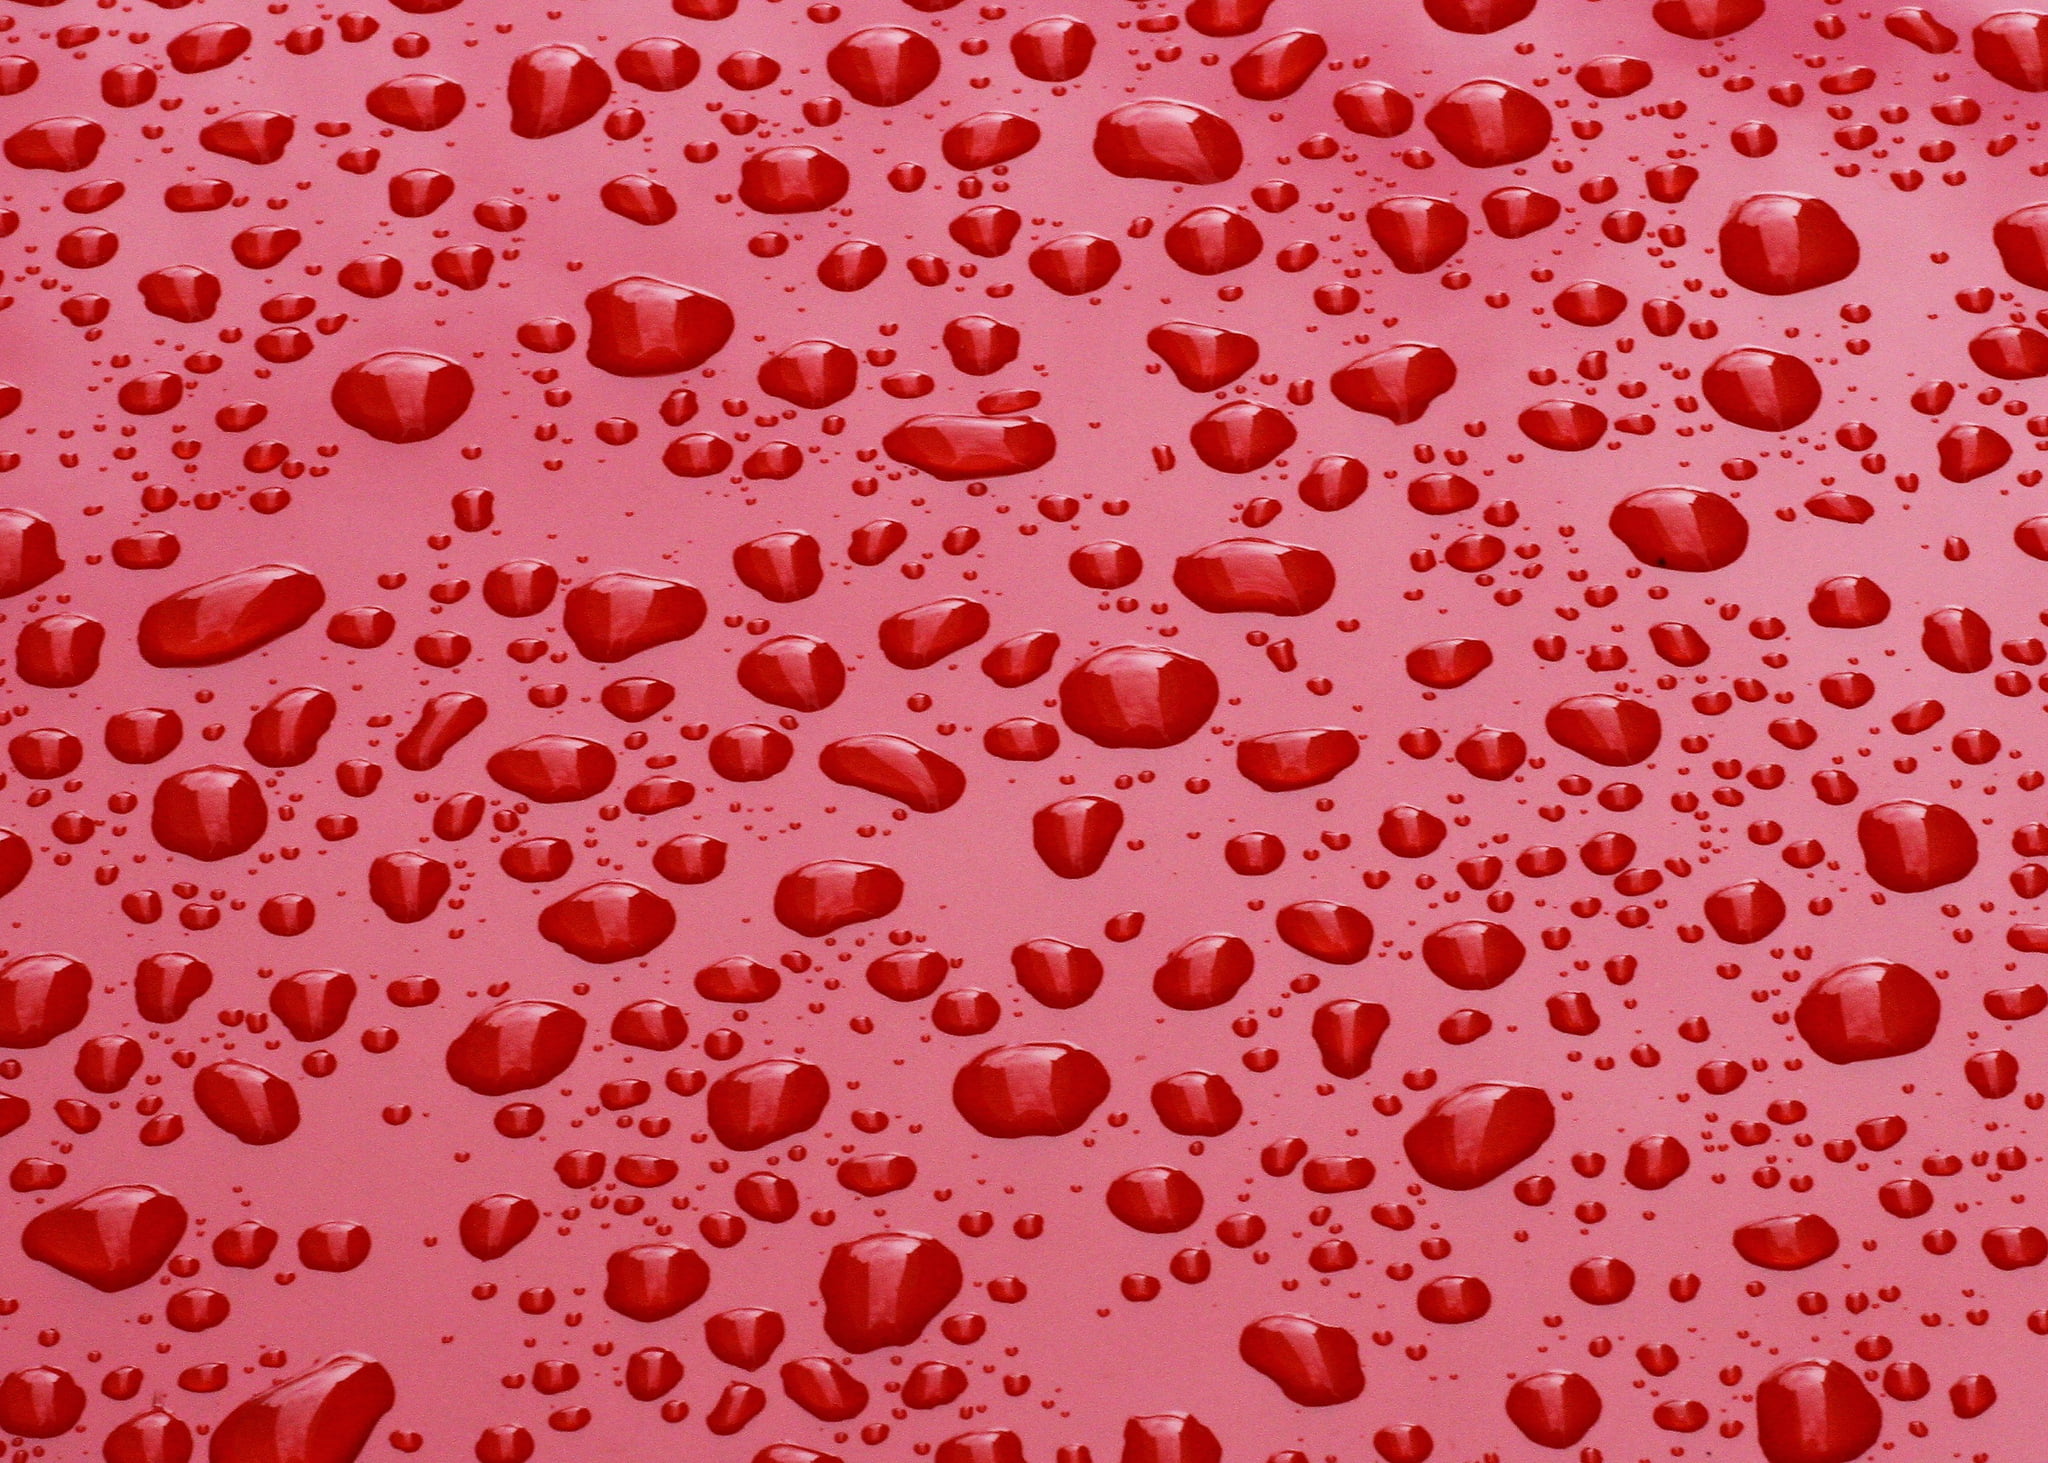 red surface with water droplets